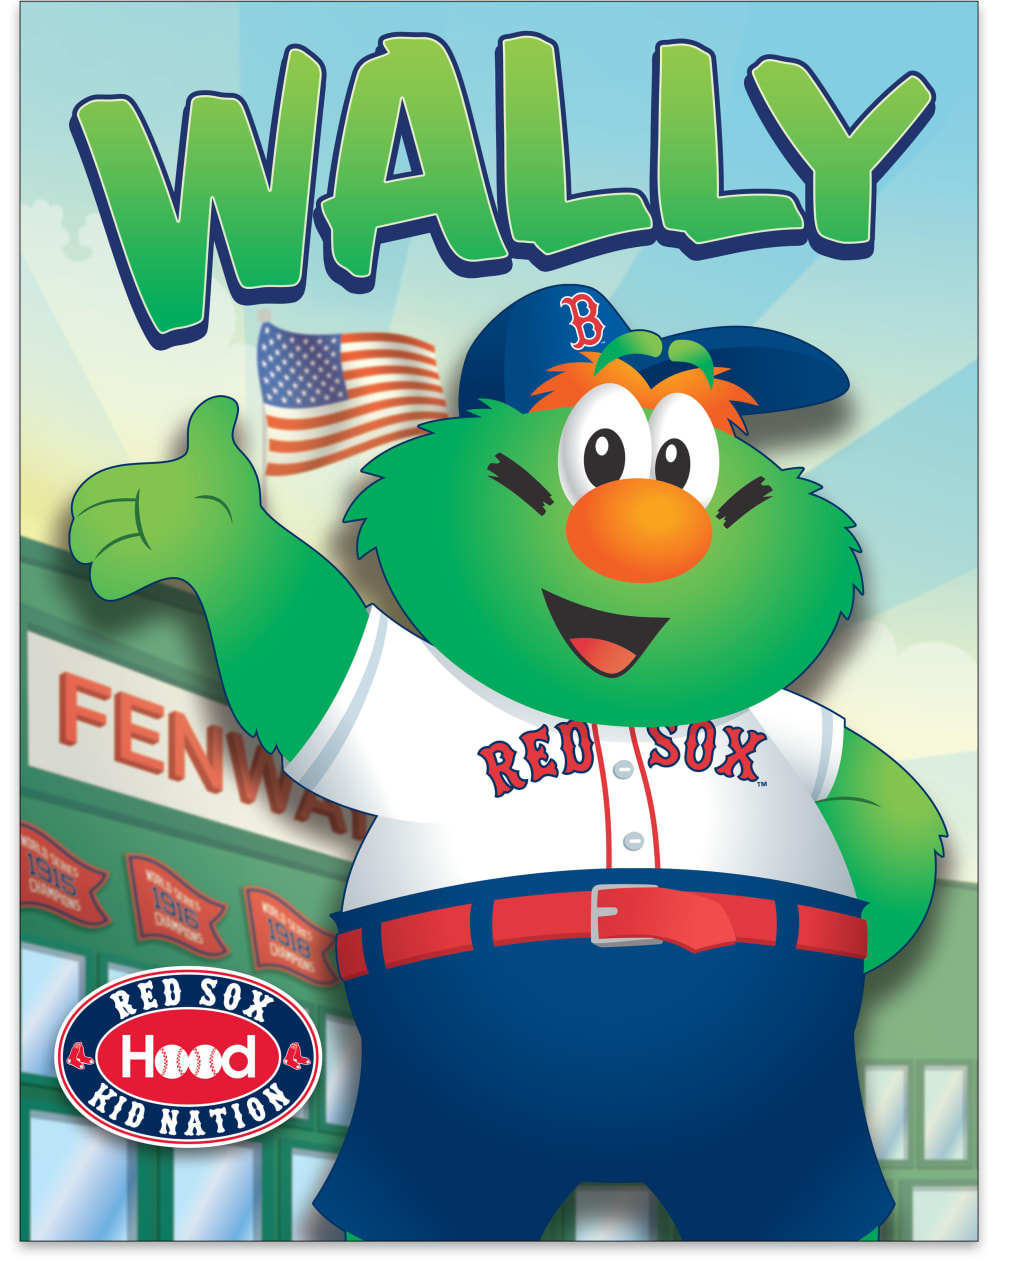 Wally the Green Monster safe at home – Boston Herald